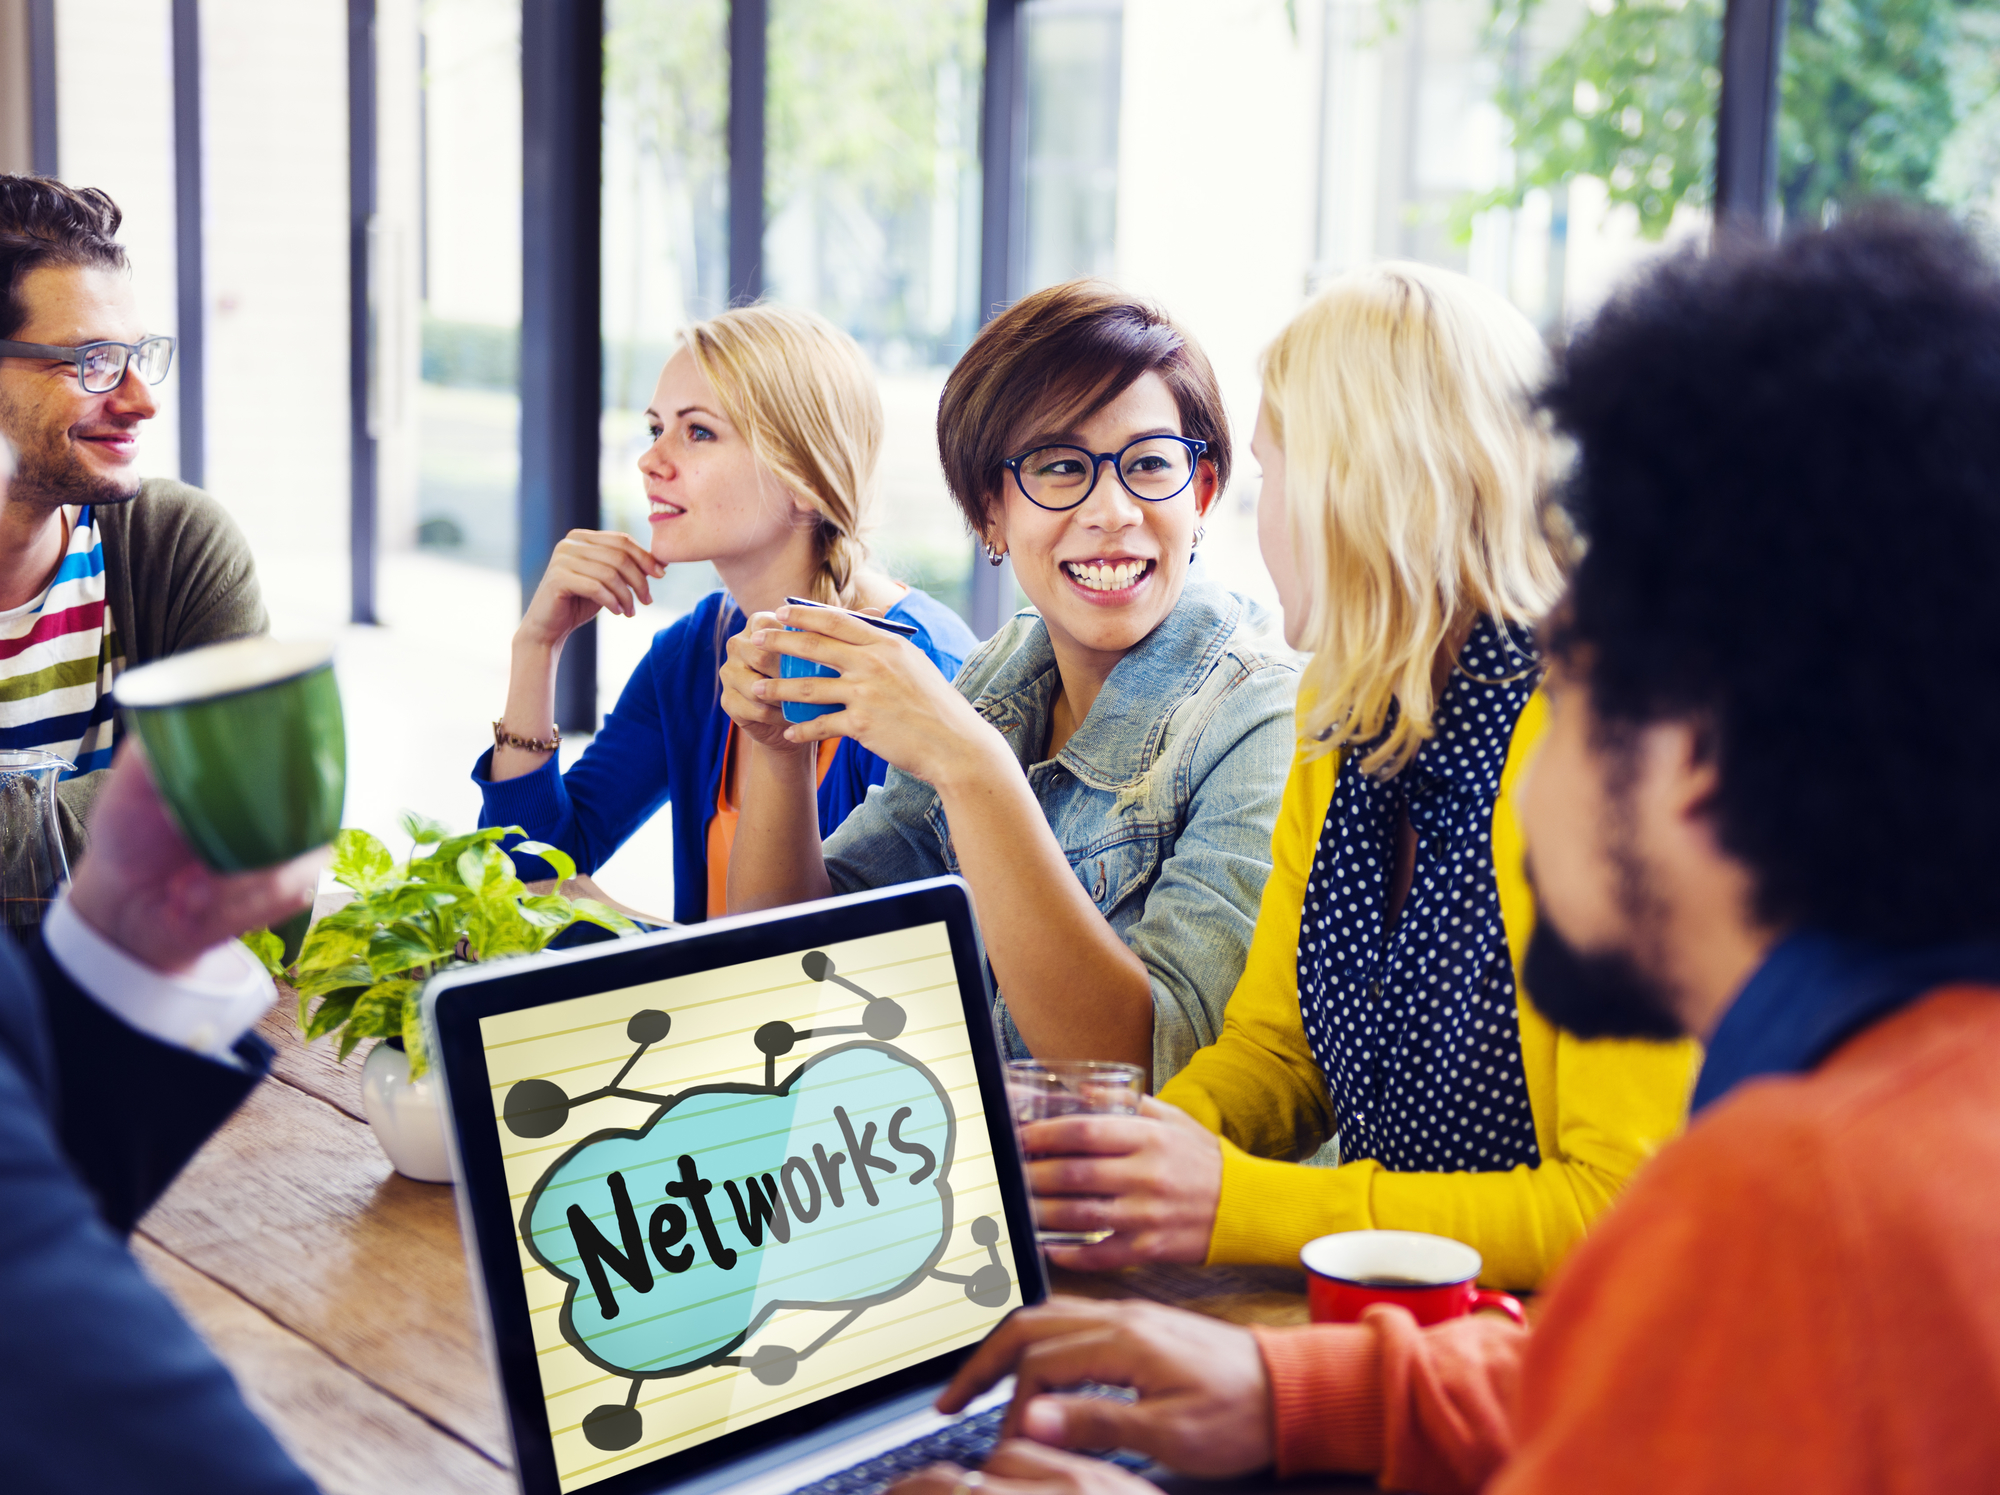 10 Tips for Building a Network that Works for You